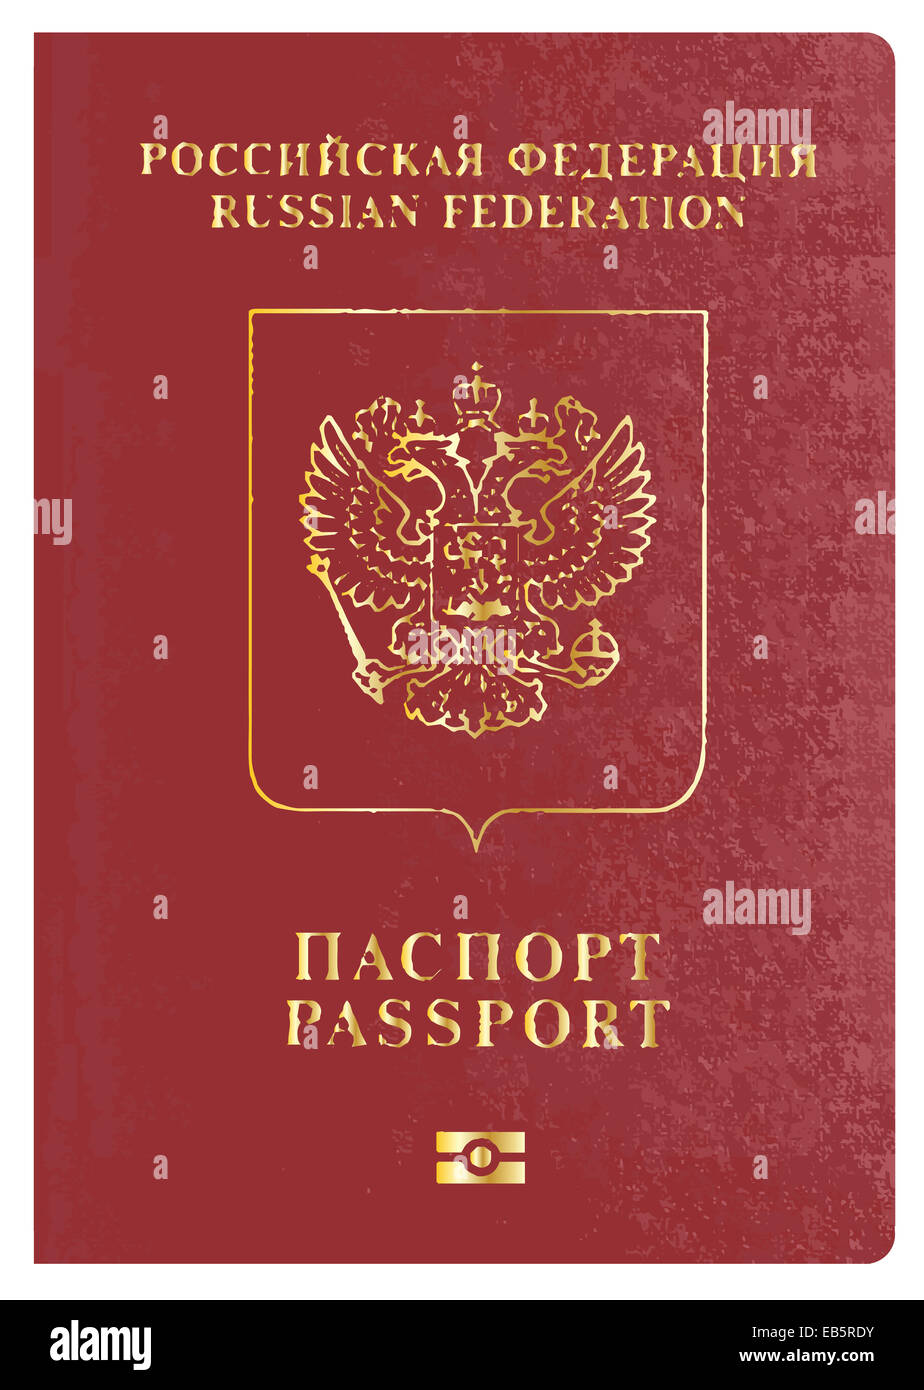 Passport Cover Stock Vector Illustration and Royalty Free Passport